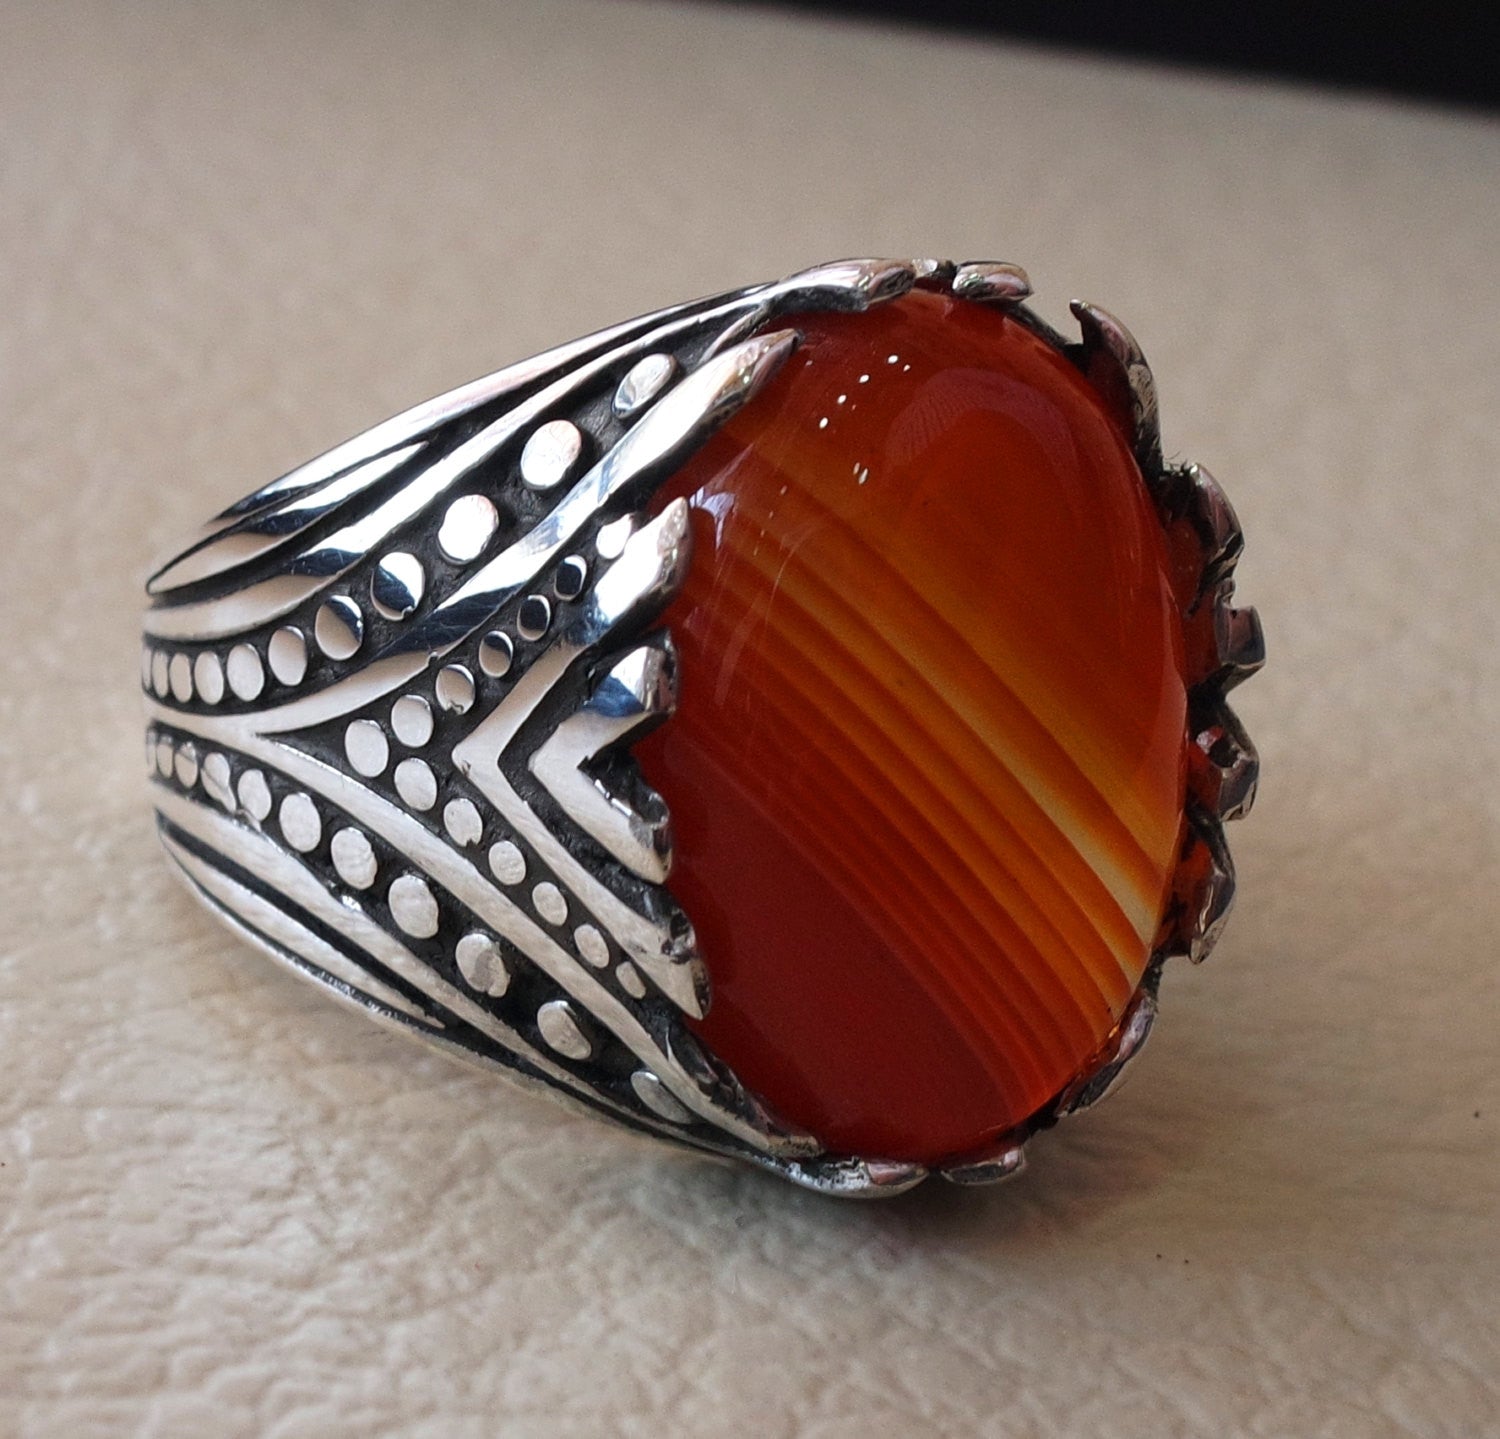 striped agate aqeeq stone red carnelian semi precious men ring all sizes antique ottoman middle eastern jewelry oval cabochon fast shipping